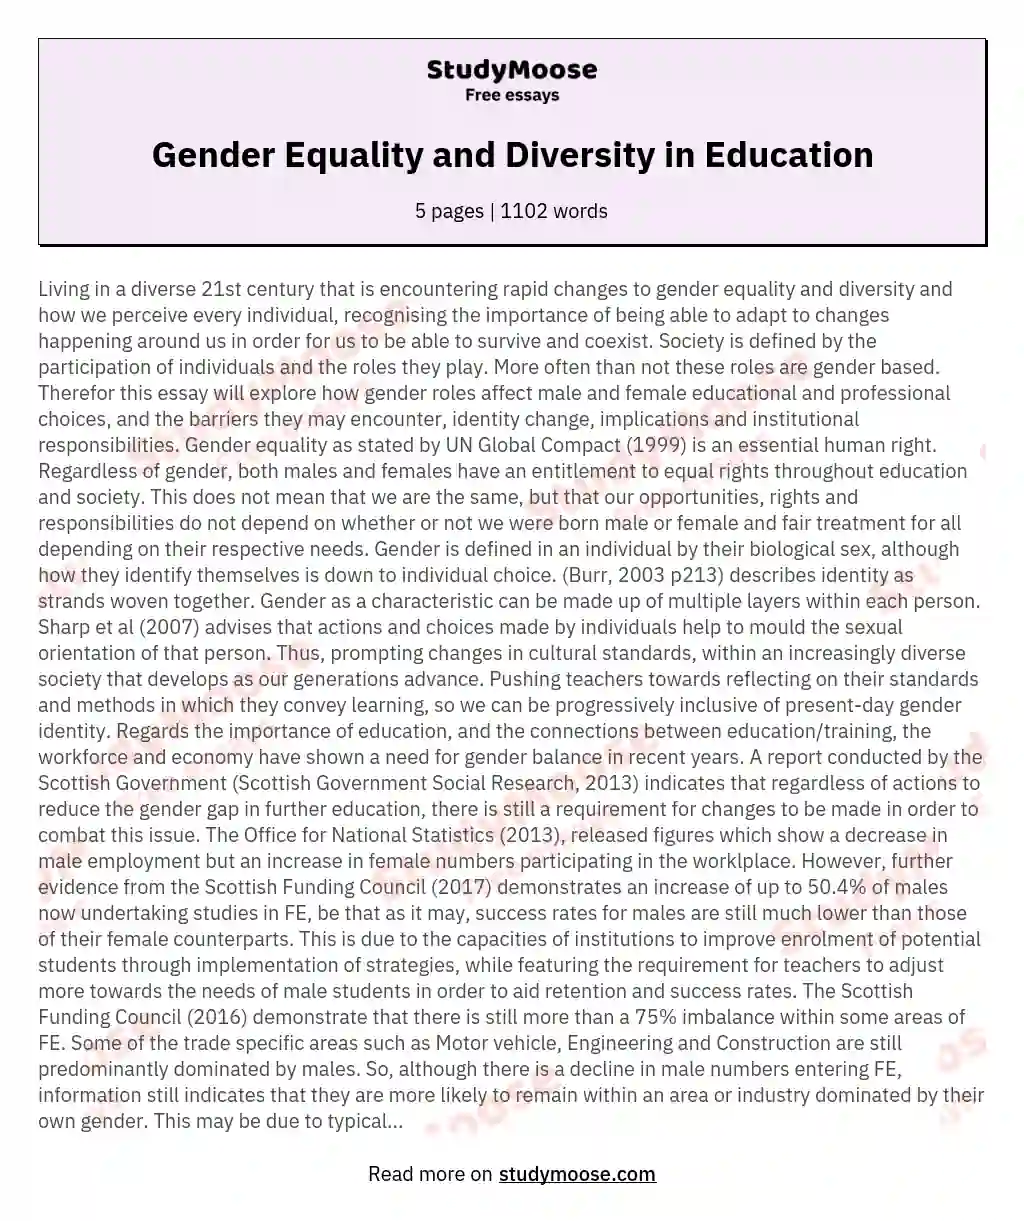 Gender Equality and Diversity in Education